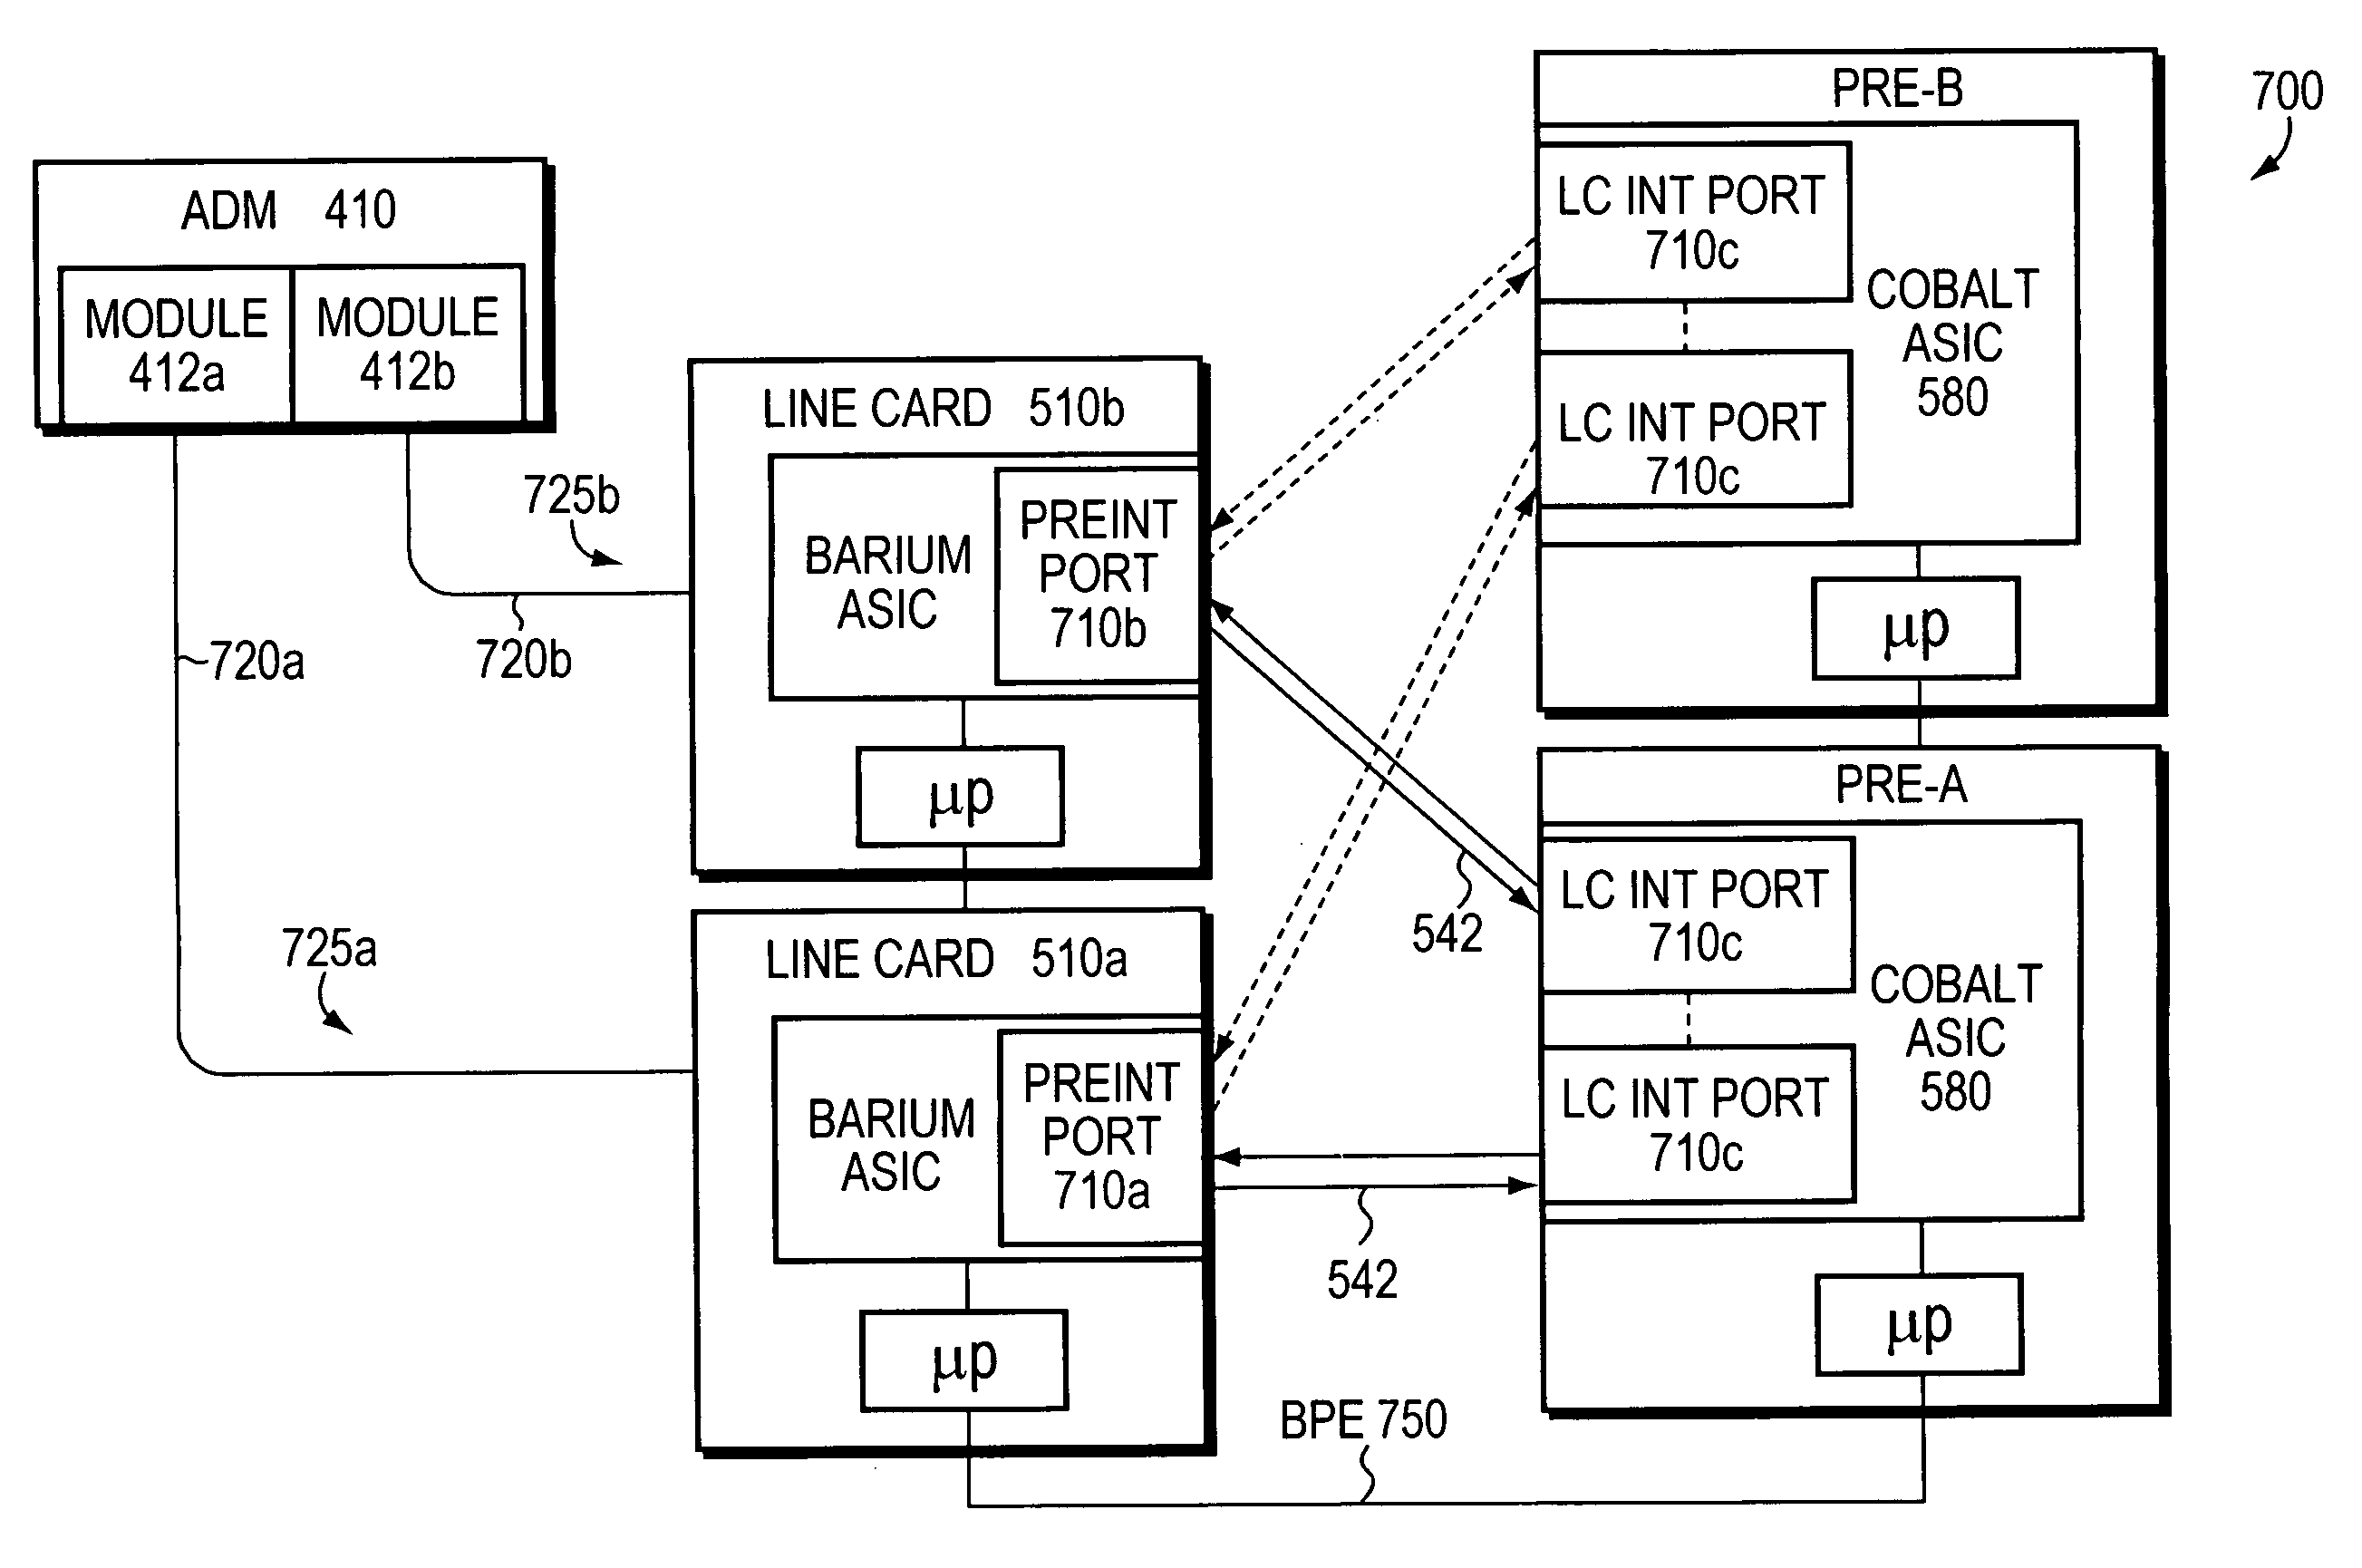 Automatic protection switching line card redundancy within an intermediate network node